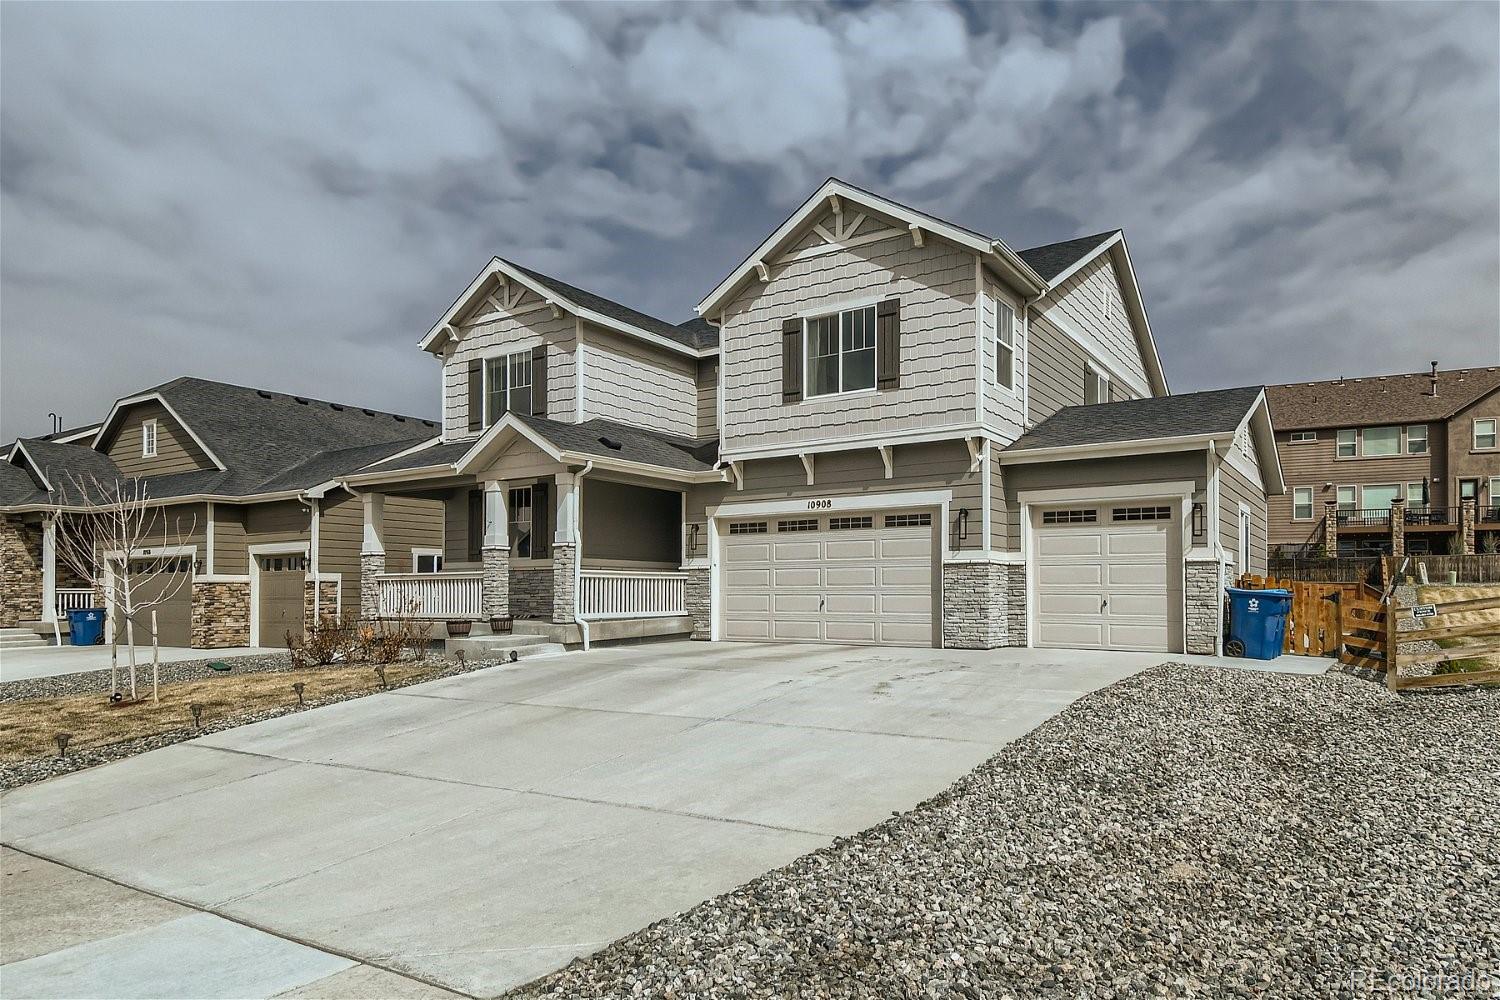 10908 Ouray Street, Commerce City, CO 80022 - MLS#: 3565551